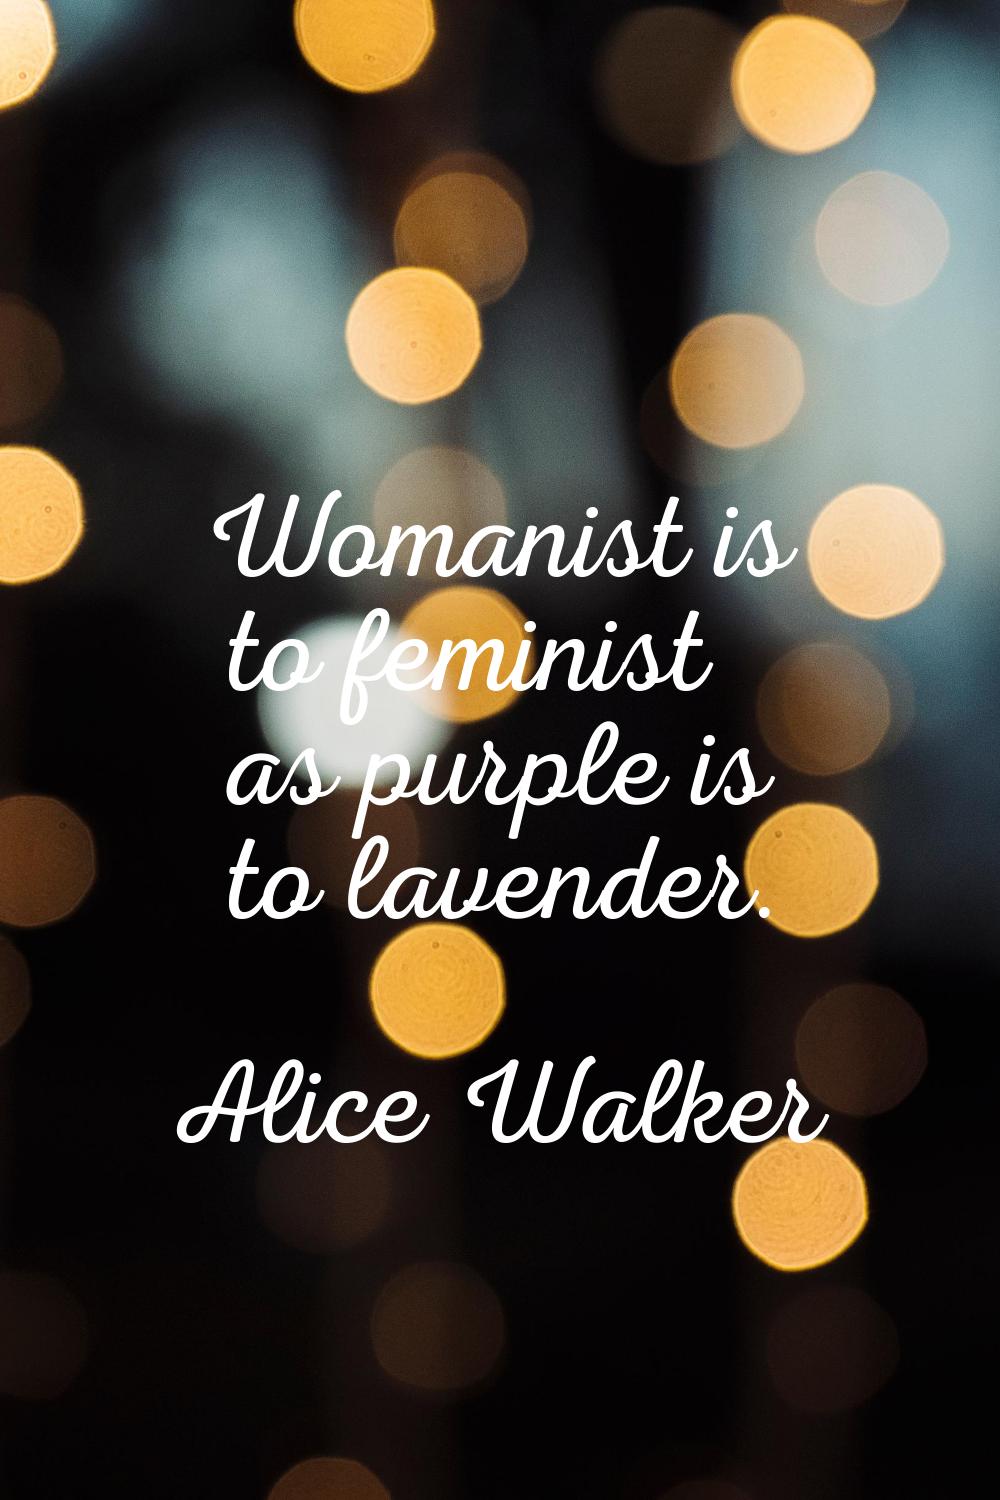 Womanist is to feminist as purple is to lavender.